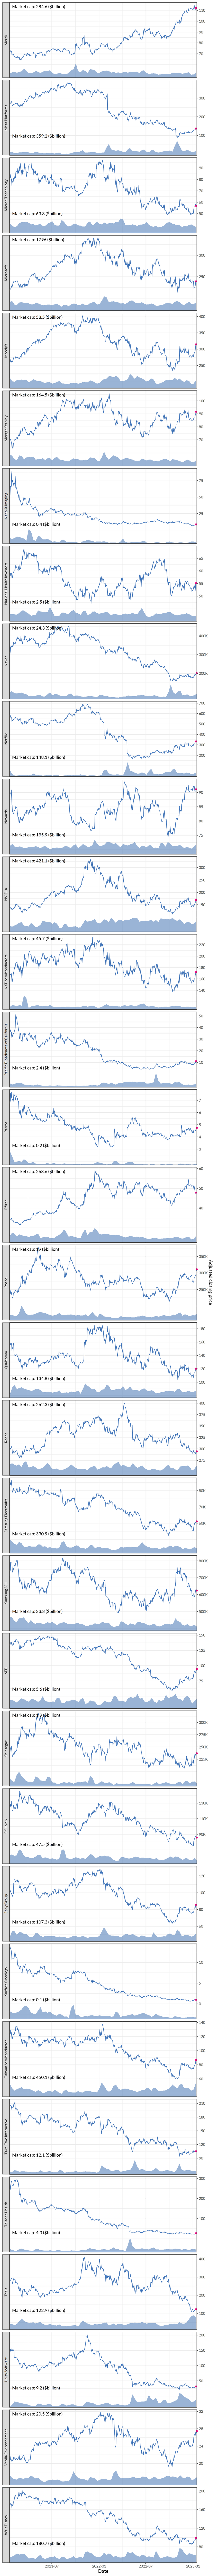 Adjusted stock prices of companies with names starting with numbers or letters A-L over the last 2 years. The blue shade at the bottom of each panel indicates trading volume per day (smoothed for visualization).